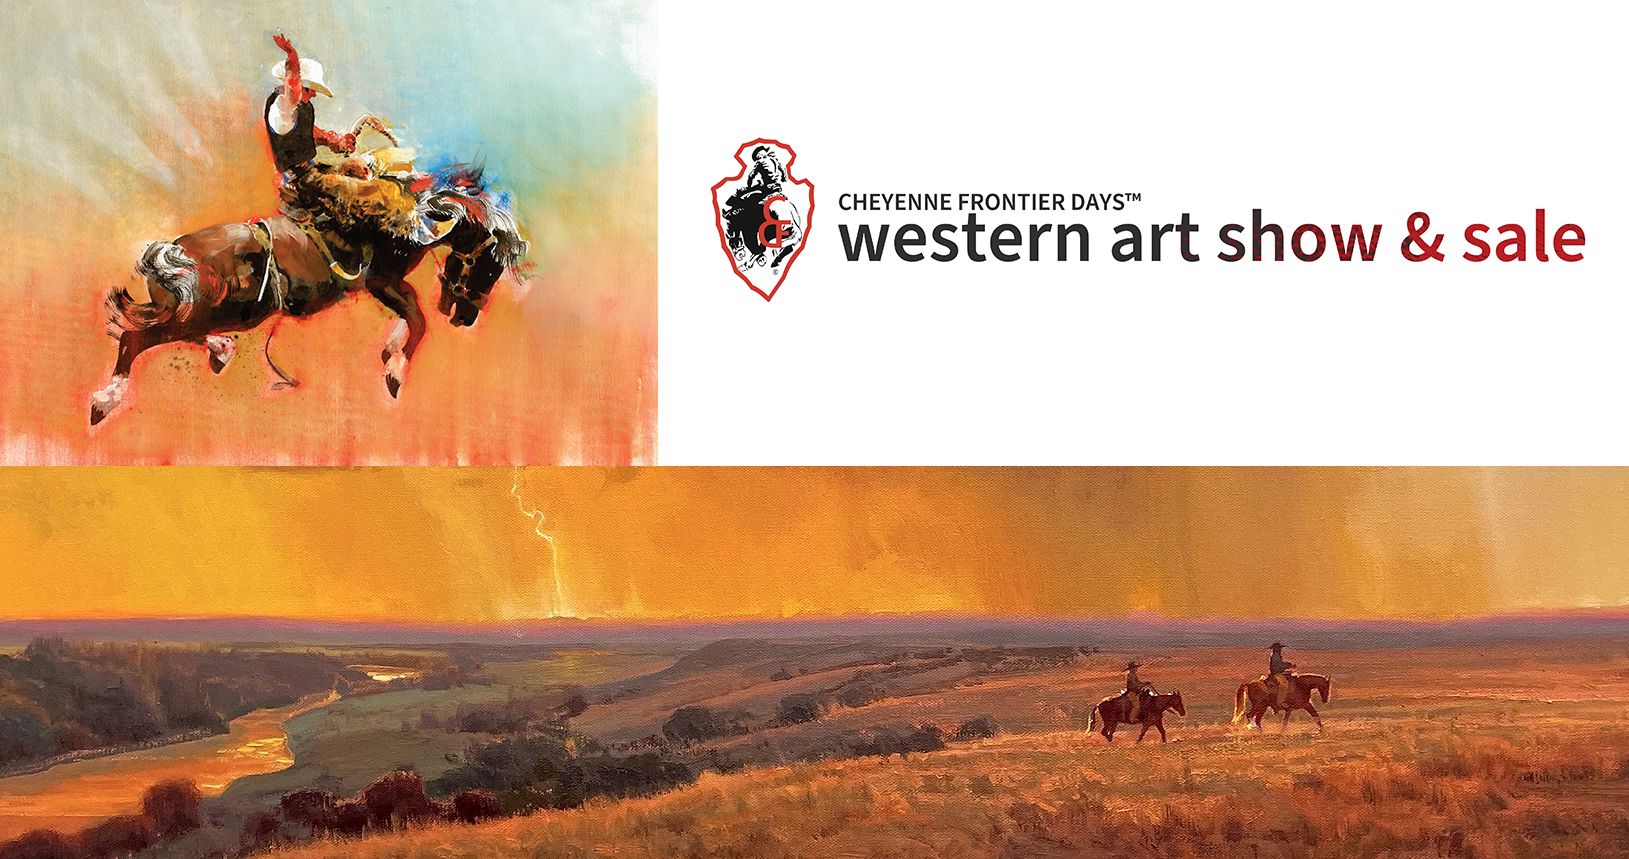 Tickets On Sale NOW For The 2023 Cheyenne Frontier Days™ Western Art Show and Sale